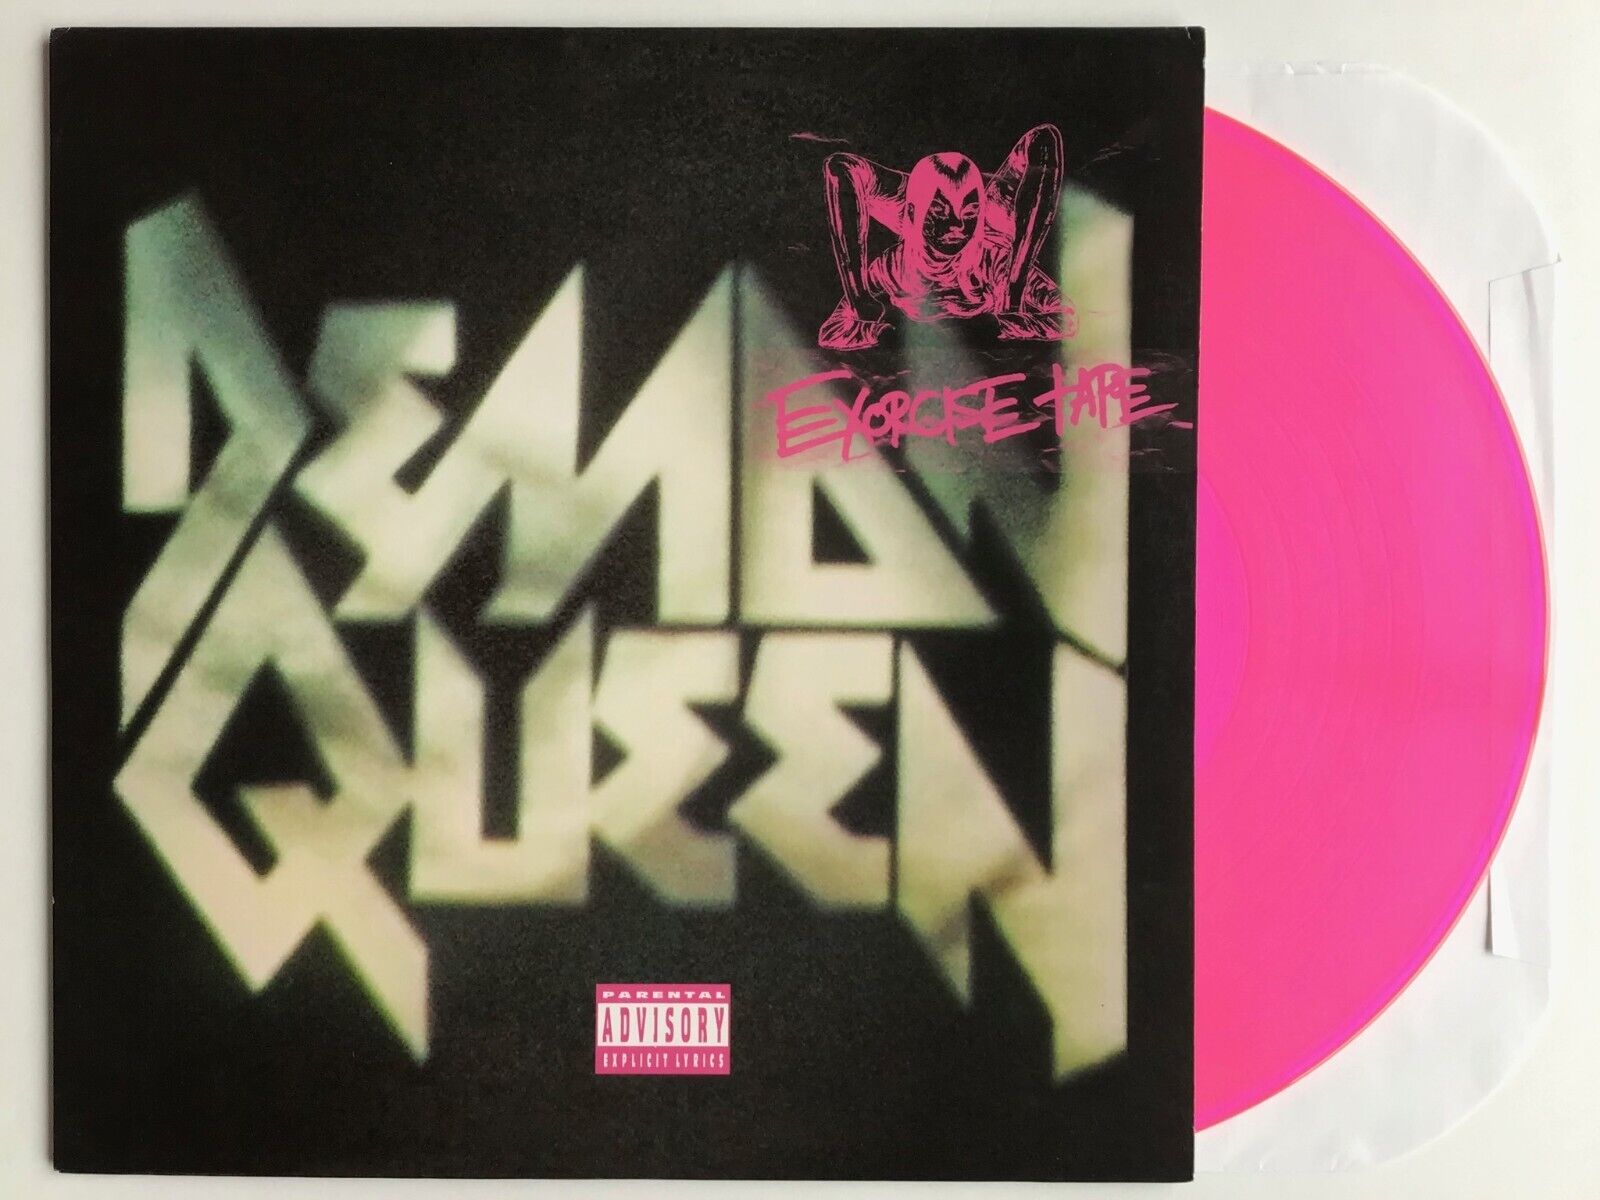 Demon Queen Vinyl Exorcise Tape LP Tobacco Zacky Force Funk Records Pink Record